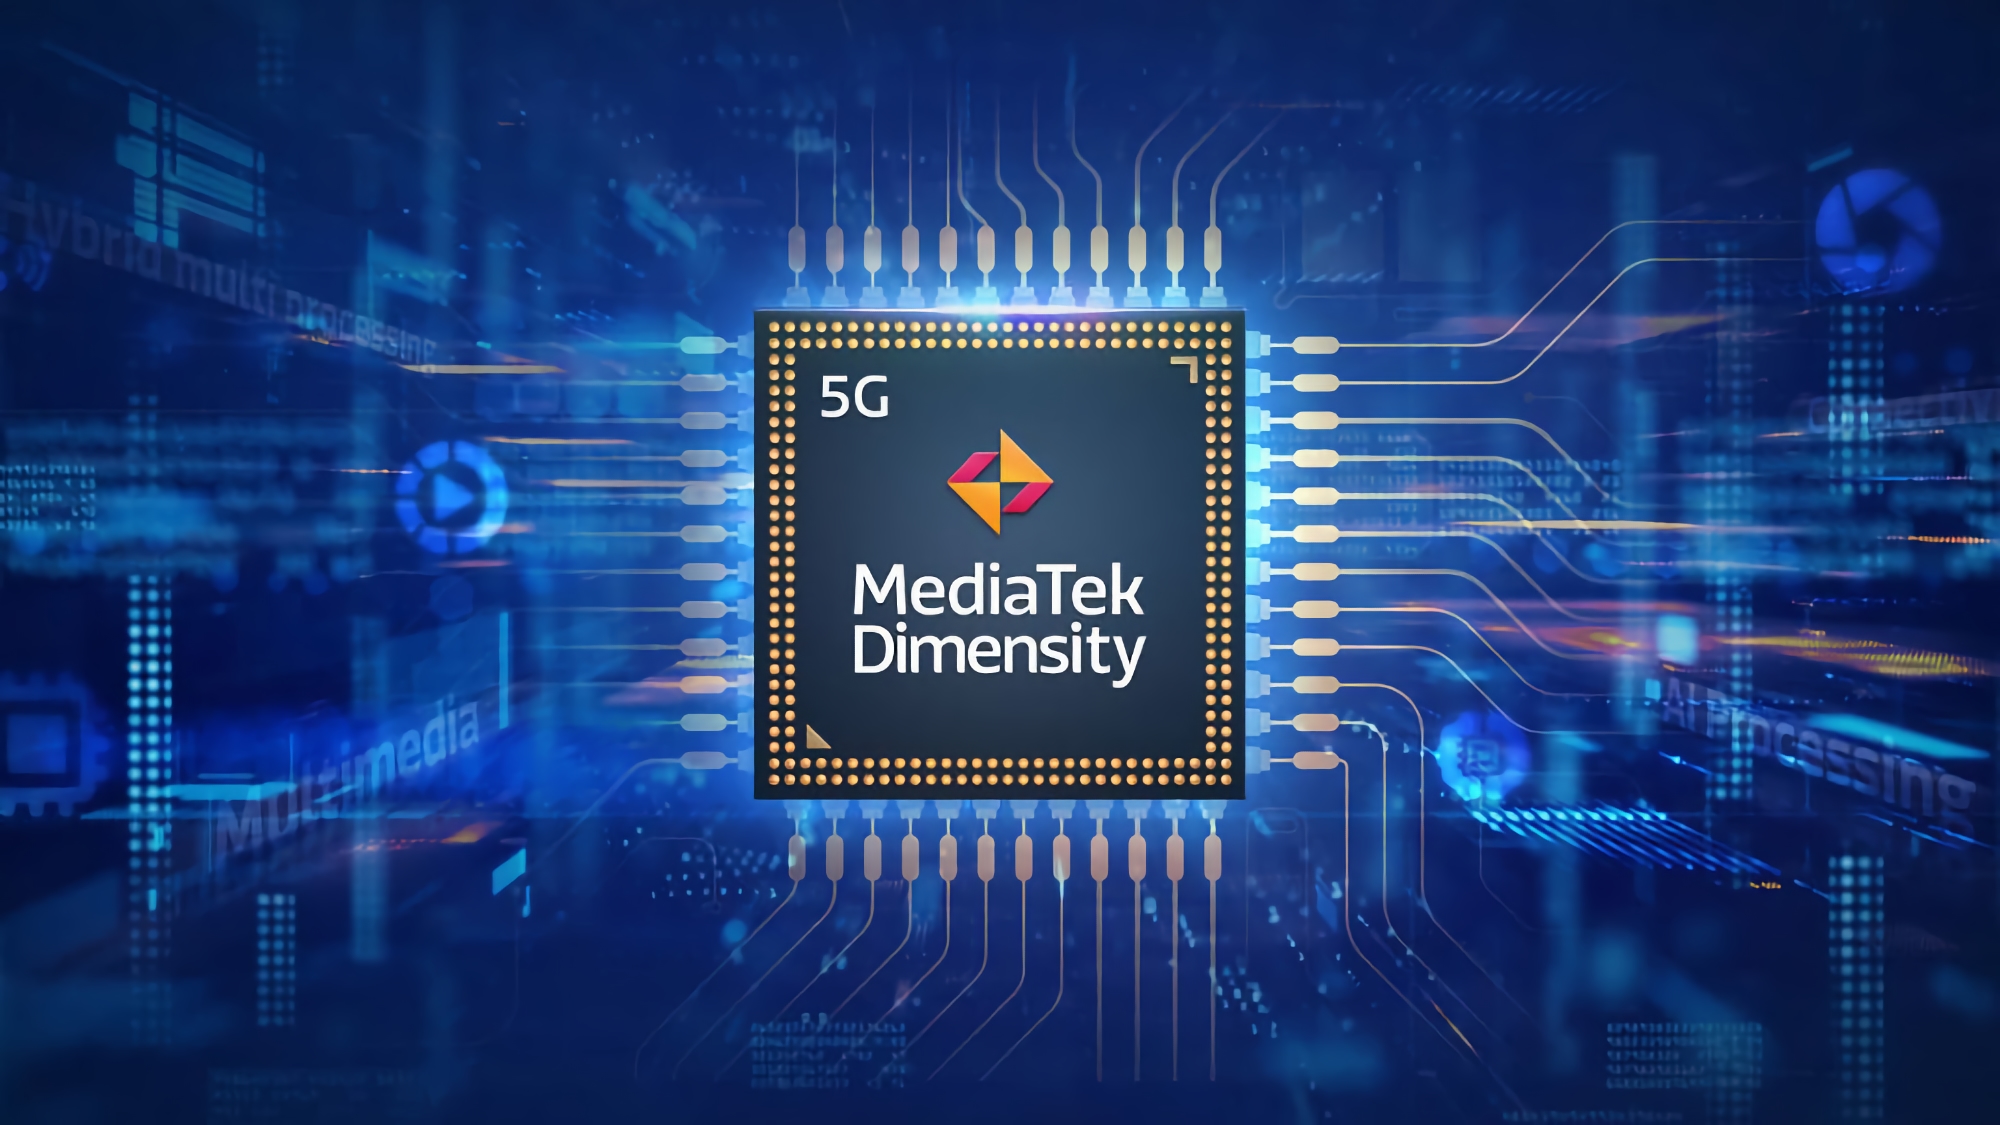 Snapdragon 8 Gen 2 competitor: MediaTek is preparing the flagship SoC Dimensity 9200 with Cortex-X3 cores